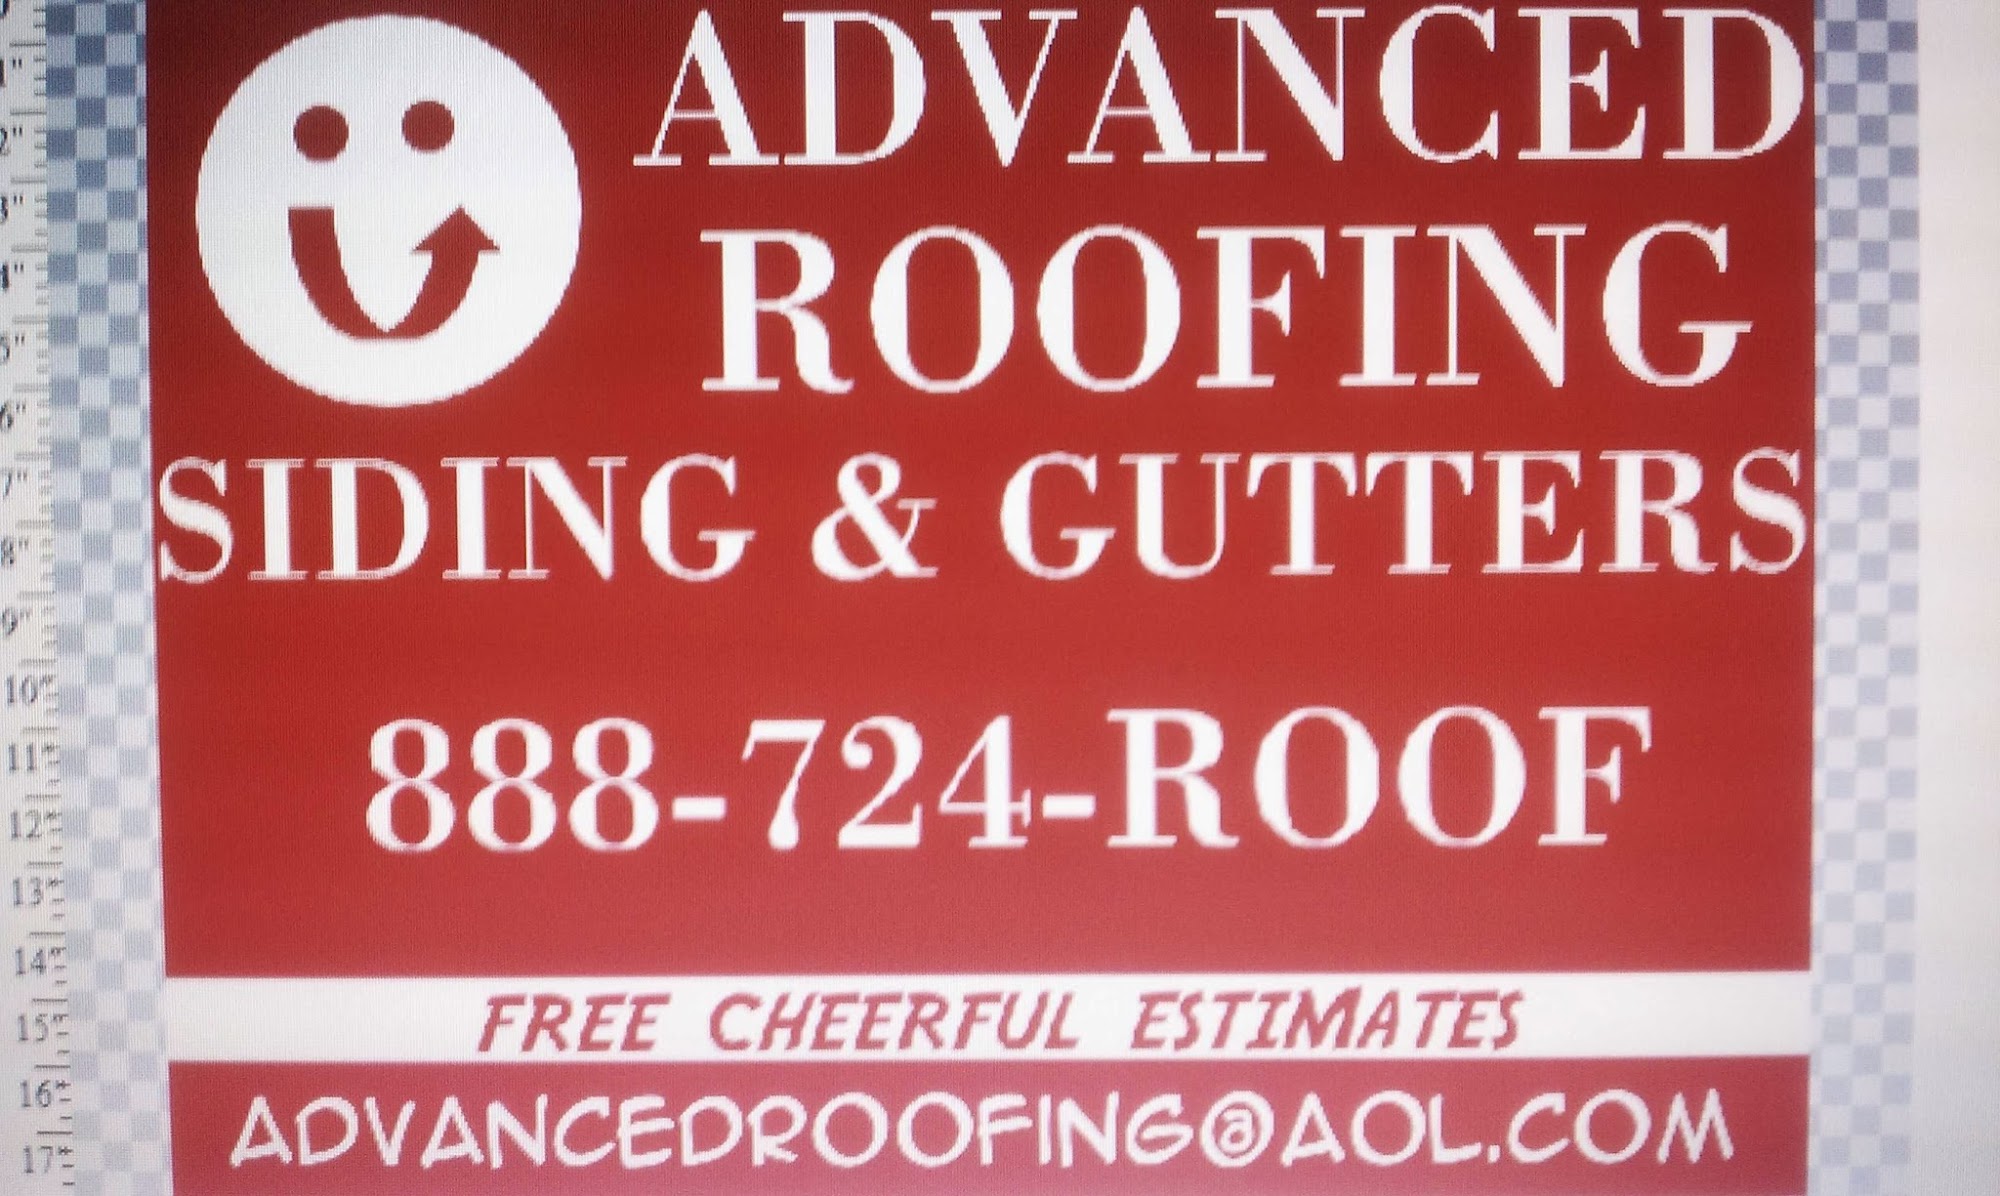 ADVANCED ROOFING & SIDING